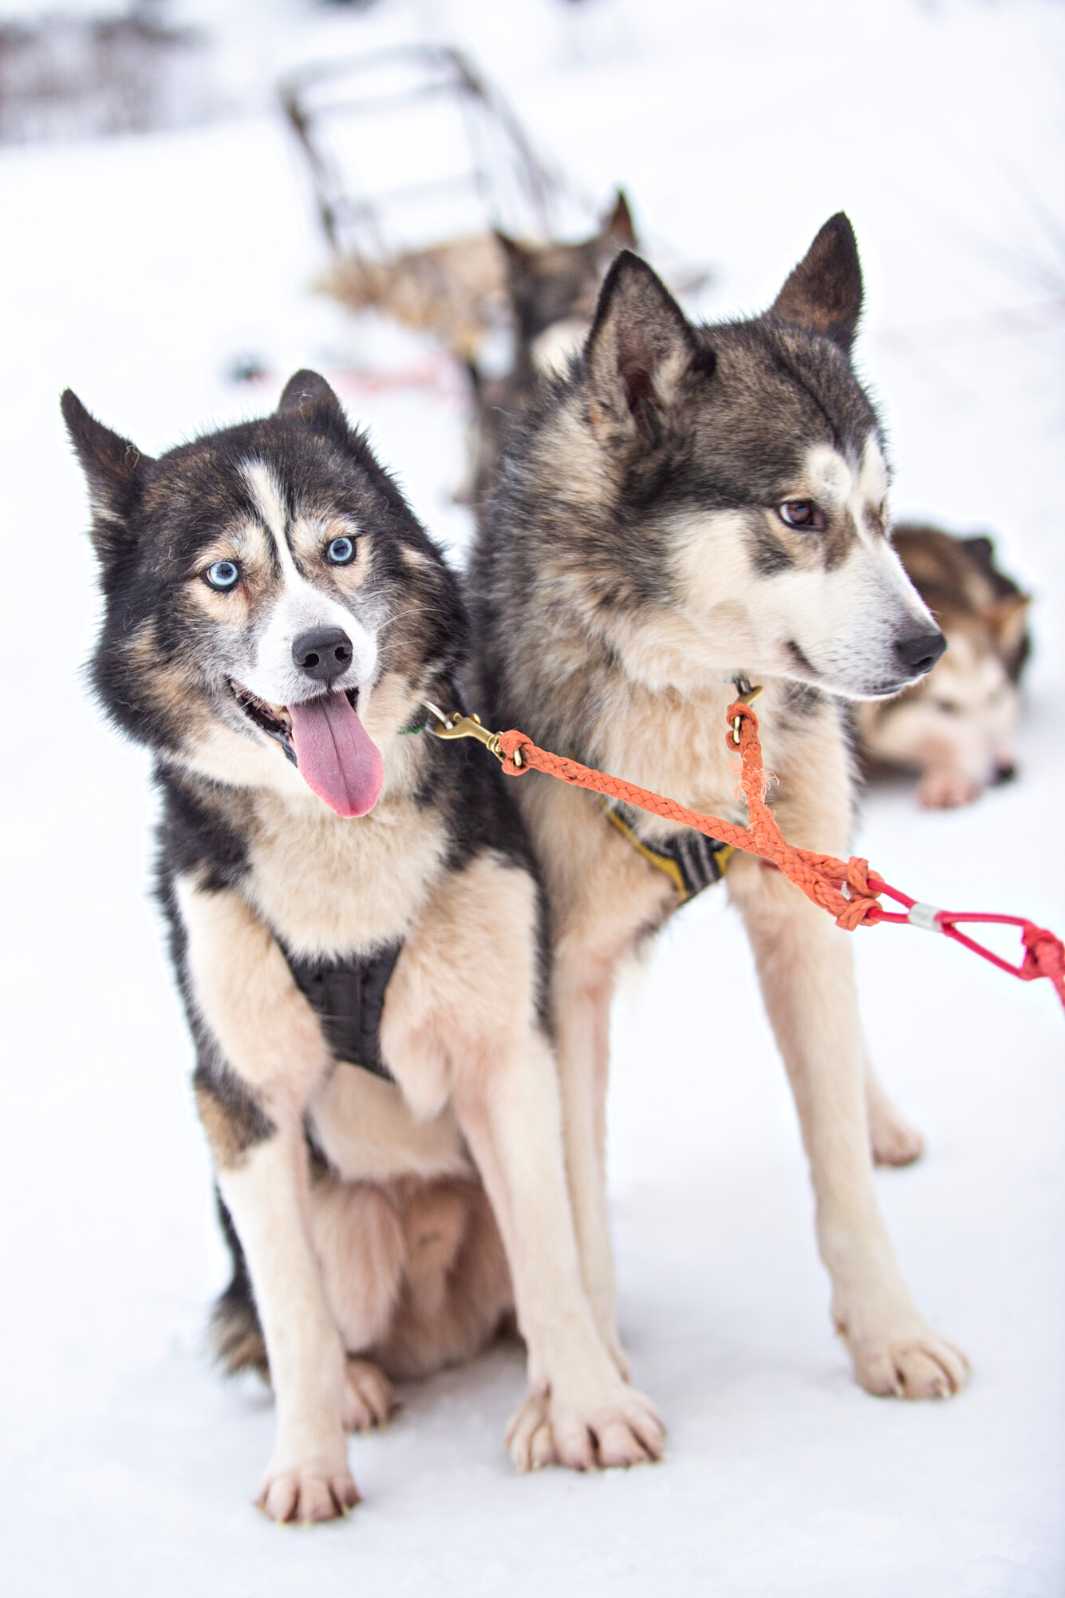 Northern Husky Sled Dogs in the snow during the winter holiday season.